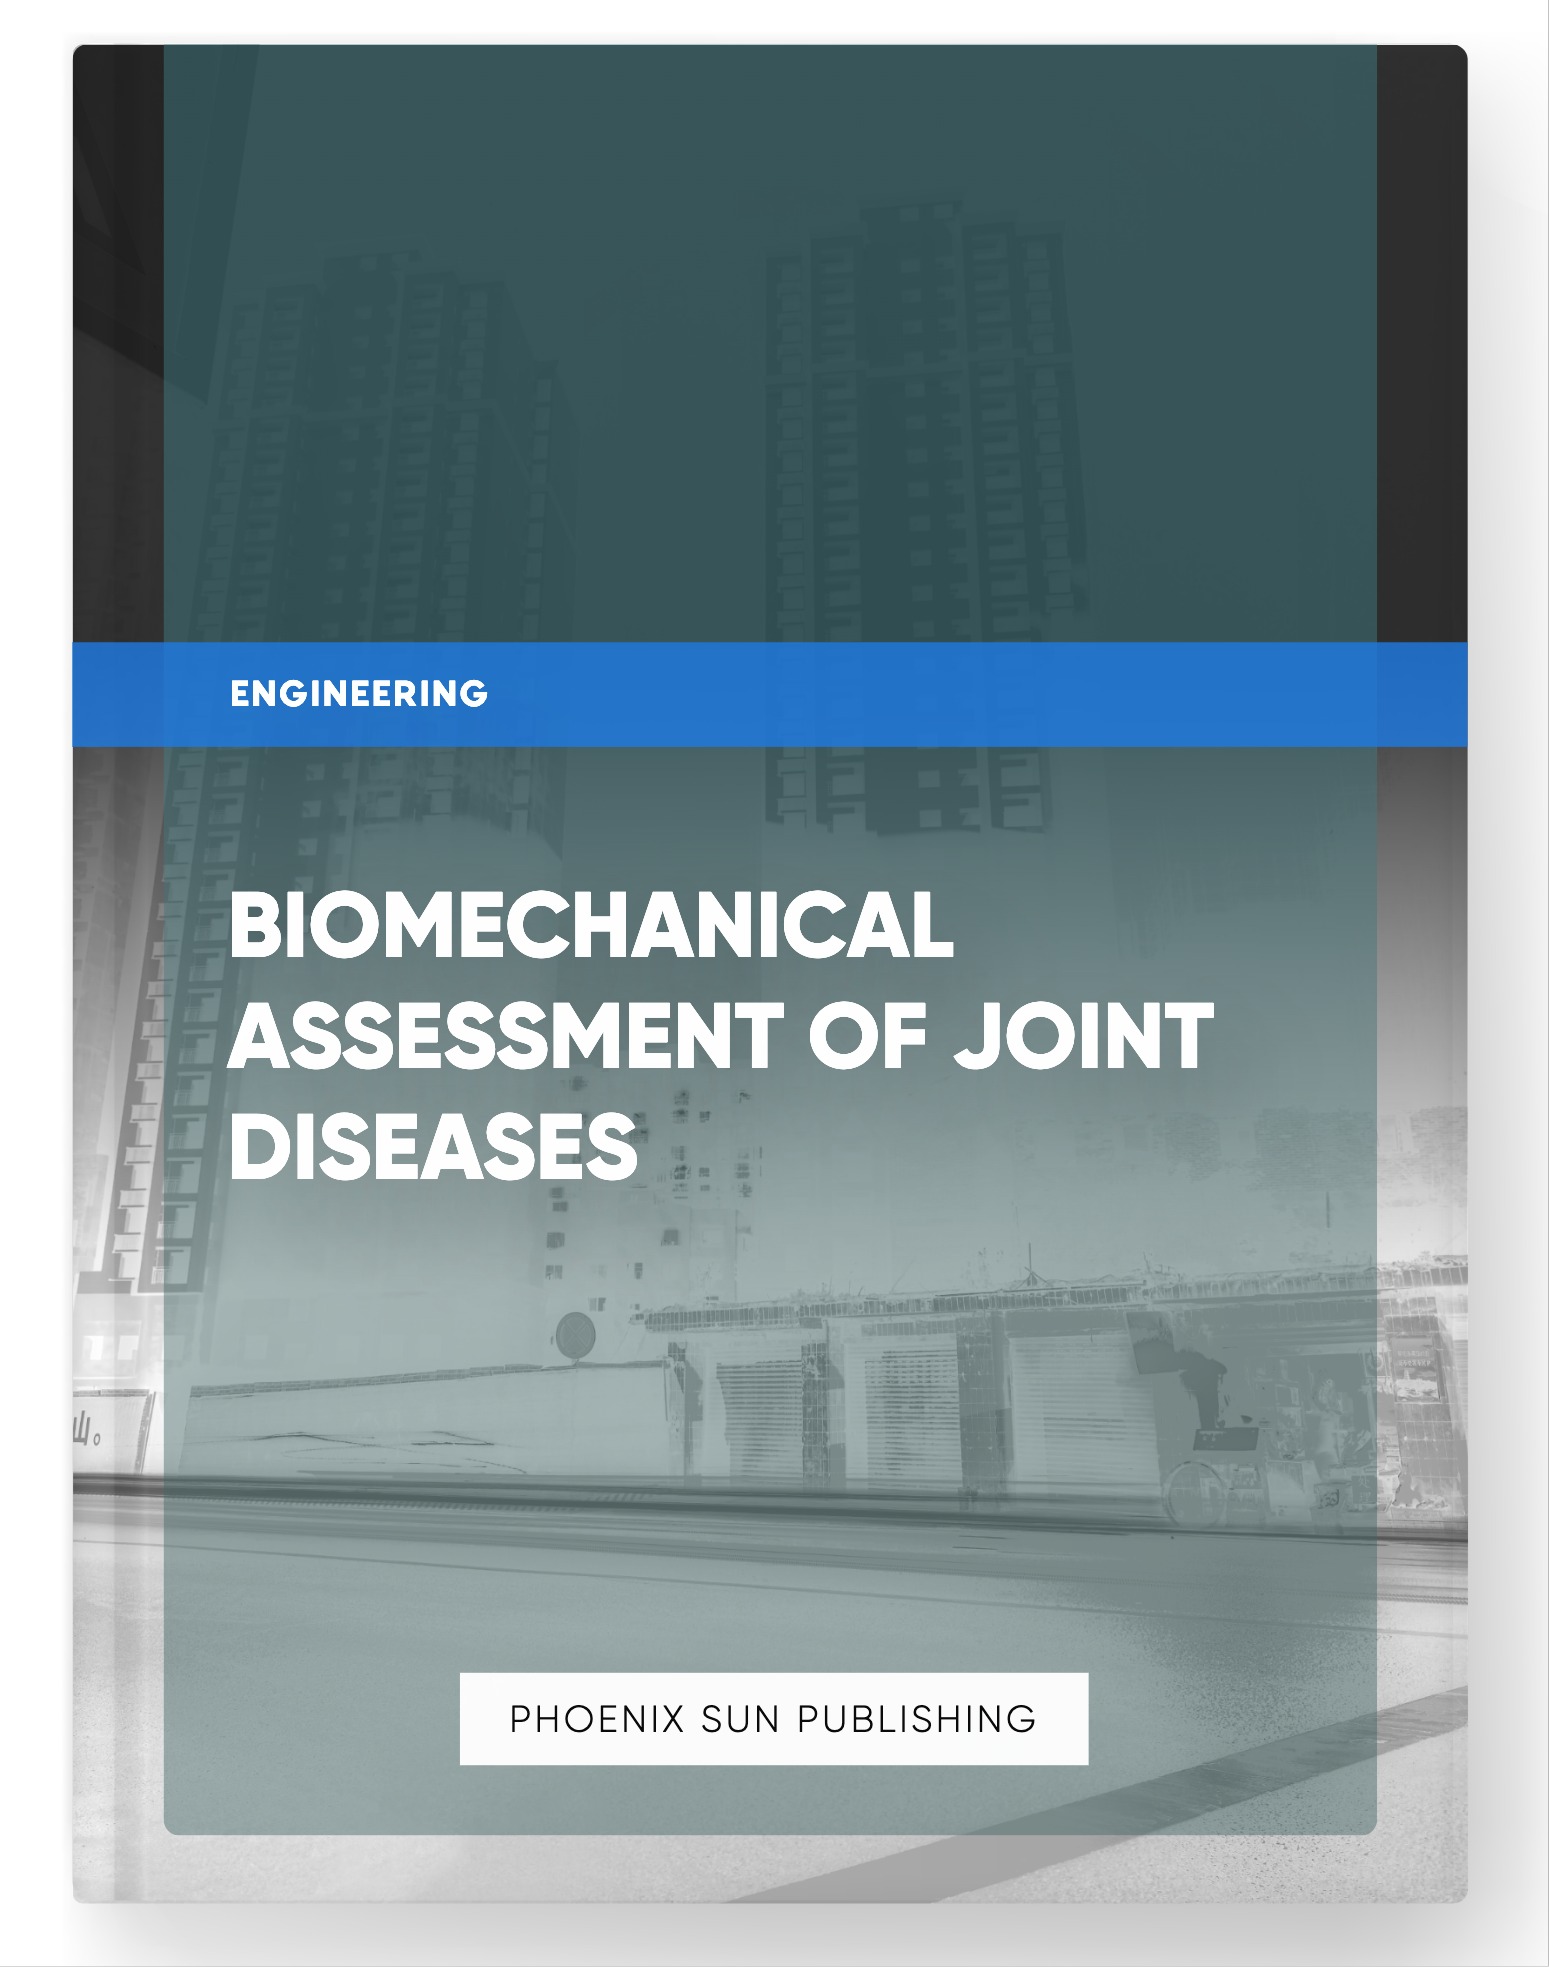 Biomechanical Assessment of Joint Diseases